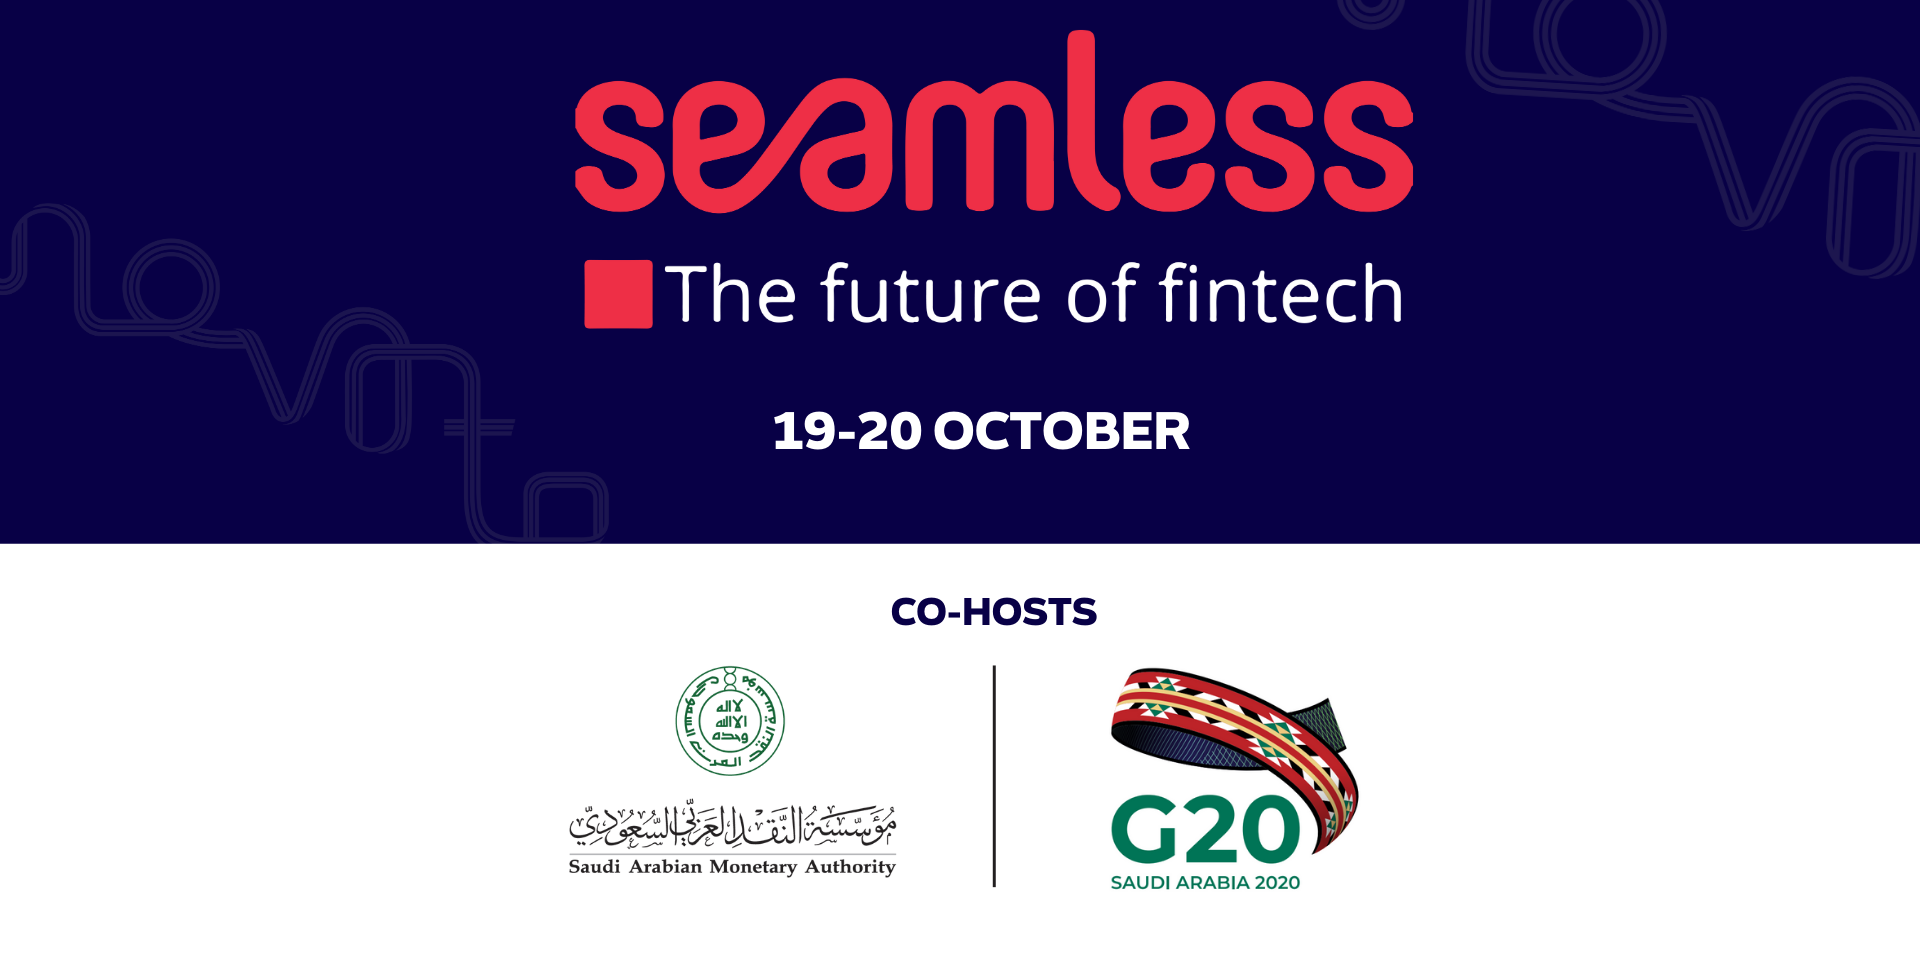 Article about The Saudi Arabian Monetary Authority (SAMA) and G20 Saudi Secretariat as part of The International Conferences Program, honoring the G20 Saudi presidency year 2020 announced as the co-hosts of Seamless Future of Fintech event